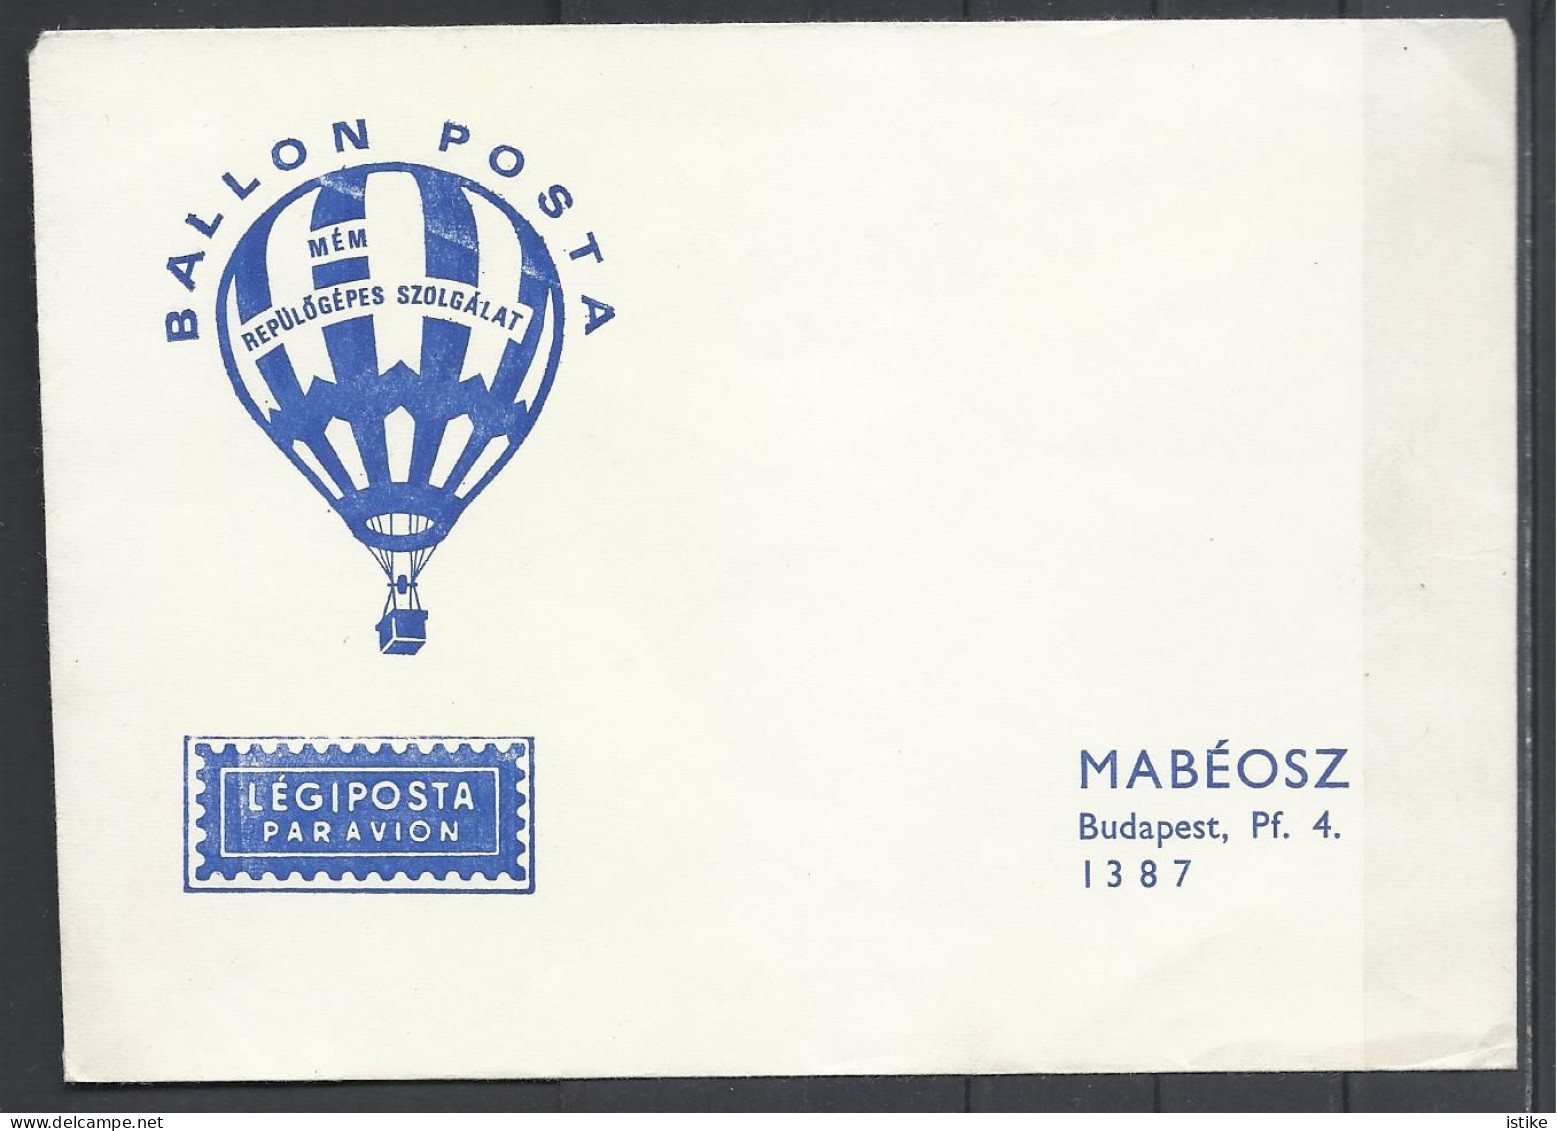 Hungary, Balloon Mail, Unused Cover, '70s. - Covers & Documents